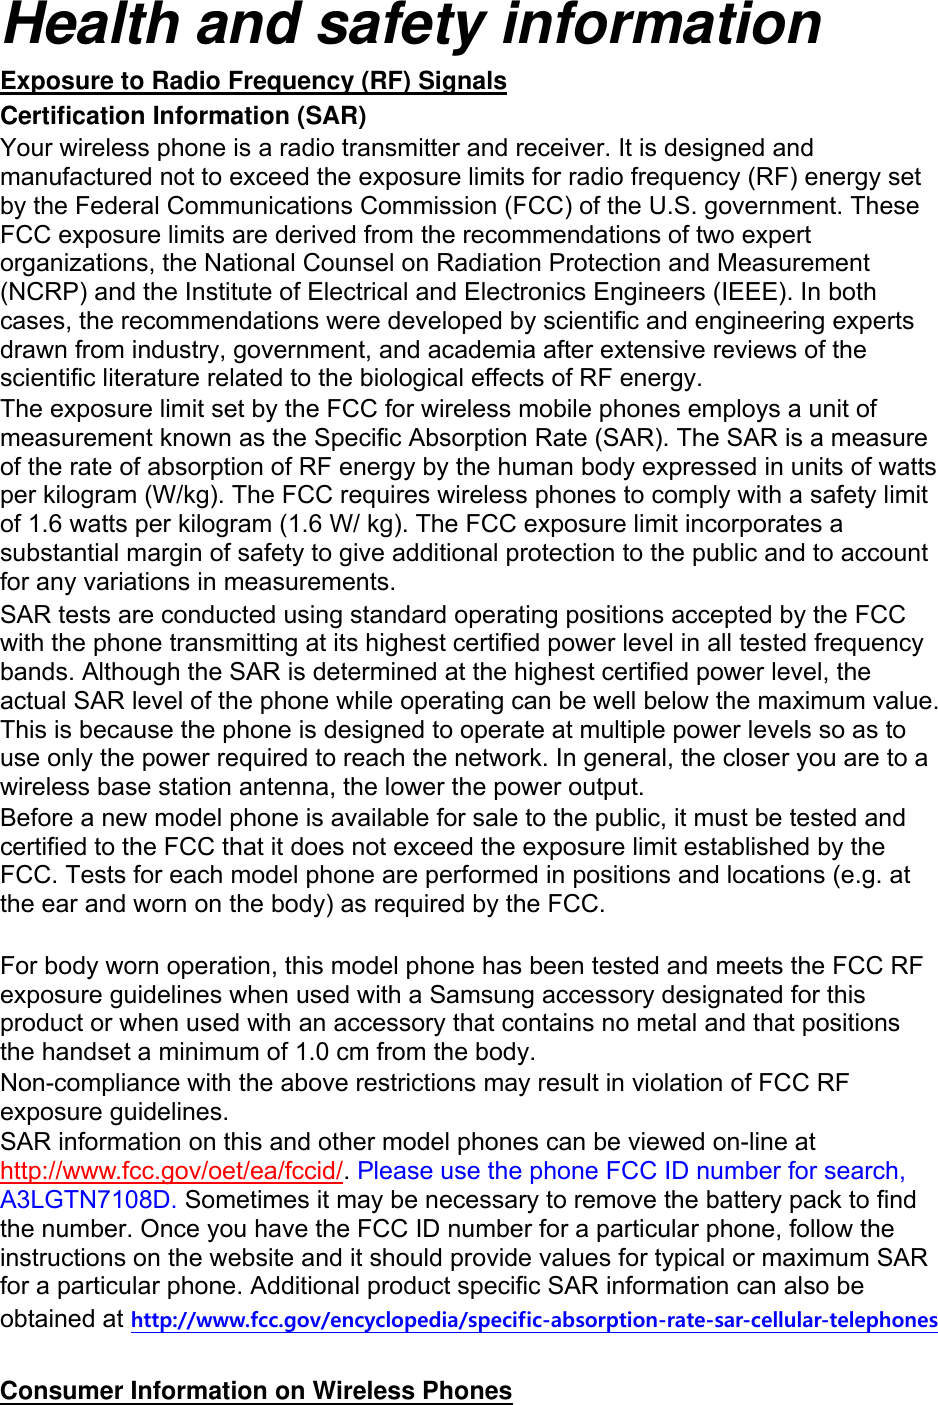 Health and safety information Exposure to Radio Frequency (RF) Signals Certification Information (SAR) Your wireless phone is a radio transmitter and receiver. It is designed and manufactured not to exceed the exposure limits for radio frequency (RF) energy set by the Federal Communications Commission (FCC) of the U.S. government. These FCC exposure limits are derived from the recommendations of two expert organizations, the National Counsel on Radiation Protection and Measurement (NCRP) and the Institute of Electrical and Electronics Engineers (IEEE). In both cases, the recommendations were developed by scientific and engineering experts drawn from industry, government, and academia after extensive reviews of the scientific literature related to the biological effects of RF energy. The exposure limit set by the FCC for wireless mobile phones employs a unit of measurement known as the Specific Absorption Rate (SAR). The SAR is a measure of the rate of absorption of RF energy by the human body expressed in units of watts per kilogram (W/kg). The FCC requires wireless phones to comply with a safety limit of 1.6 watts per kilogram (1.6 W/ kg). The FCC exposure limit incorporates a substantial margin of safety to give additional protection to the public and to account for any variations in measurements. SAR tests are conducted using standard operating positions accepted by the FCC with the phone transmitting at its highest certified power level in all tested frequency bands. Although the SAR is determined at the highest certified power level, the actual SAR level of the phone while operating can be well below the maximum value. This is because the phone is designed to operate at multiple power levels so as to use only the power required to reach the network. In general, the closer you are to a wireless base station antenna, the lower the power output. Before a new model phone is available for sale to the public, it must be tested and certified to the FCC that it does not exceed the exposure limit established by the FCC. Tests for each model phone are performed in positions and locations (e.g. at the ear and worn on the body) as required by the FCC.      For body worn operation, this model phone has been tested and meets the FCC RF exposure guidelines when used with a Samsung accessory designated for this product or when used with an accessory that contains no metal and that positions the handset a minimum of 1.0 cm from the body.   Non-compliance with the above restrictions may result in violation of FCC RF exposure guidelines. SAR information on this and other model phones can be viewed on-line at http://www.fcc.gov/oet/ea/fccid/. Please use the phone FCC ID number for search, A3LGTN7108D. Sometimes it may be necessary to remove the battery pack to find the number. Once you have the FCC ID number for a particular phone, follow the instructions on the website and it should provide values for typical or maximum SAR for a particular phone. Additional product specific SAR information can also be obtained at http://www.fcc.gov/encyclopedia/specific-absorption-rate-sar-cellular-telephones  Consumer Information on Wireless Phones 